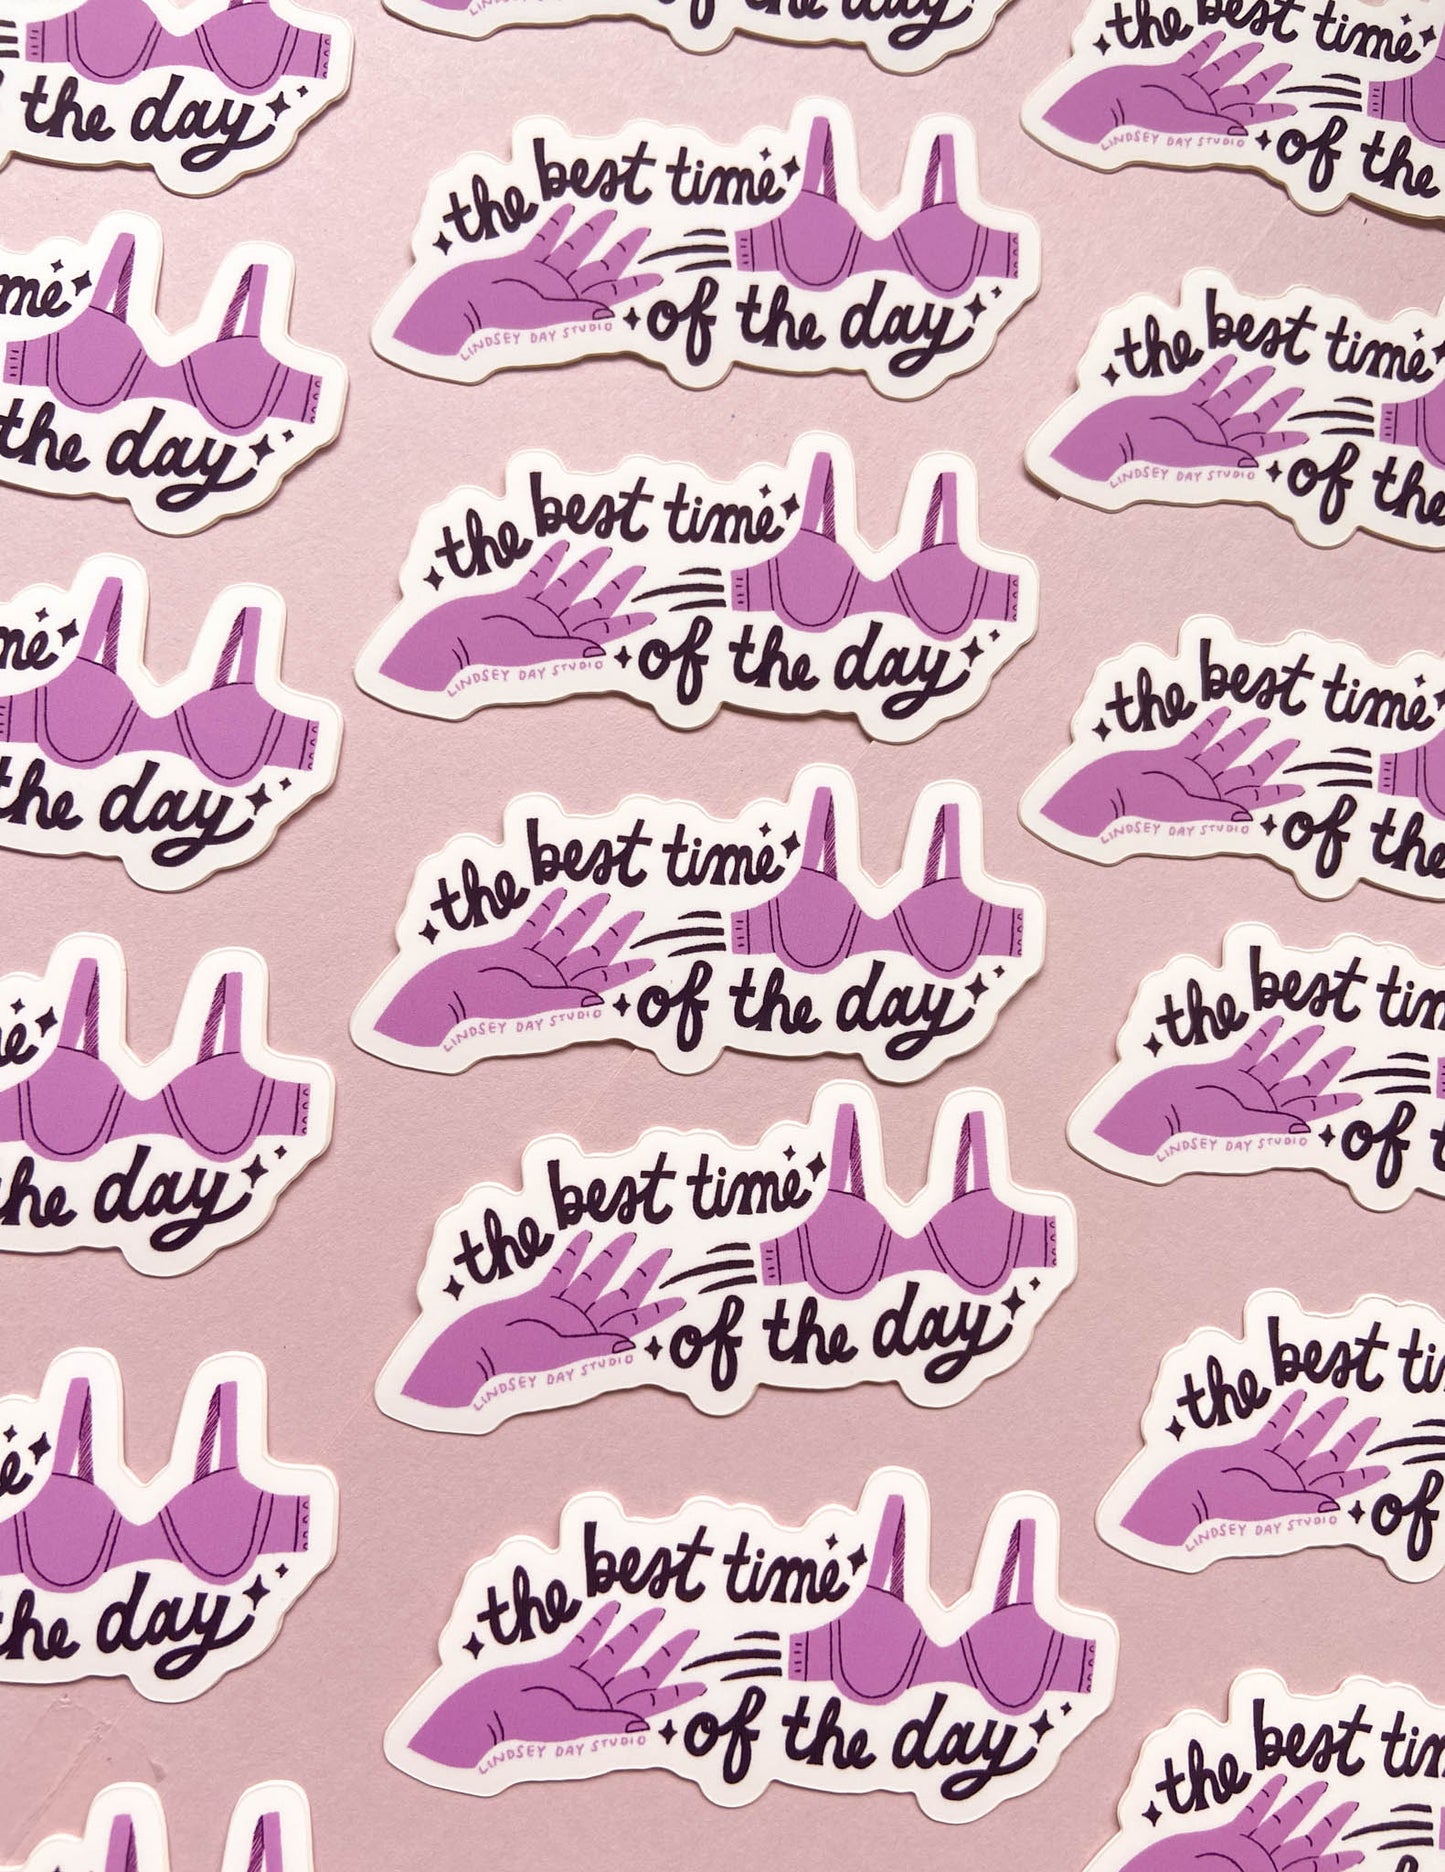 Best Time of the Day Sticker, 3x1 in.